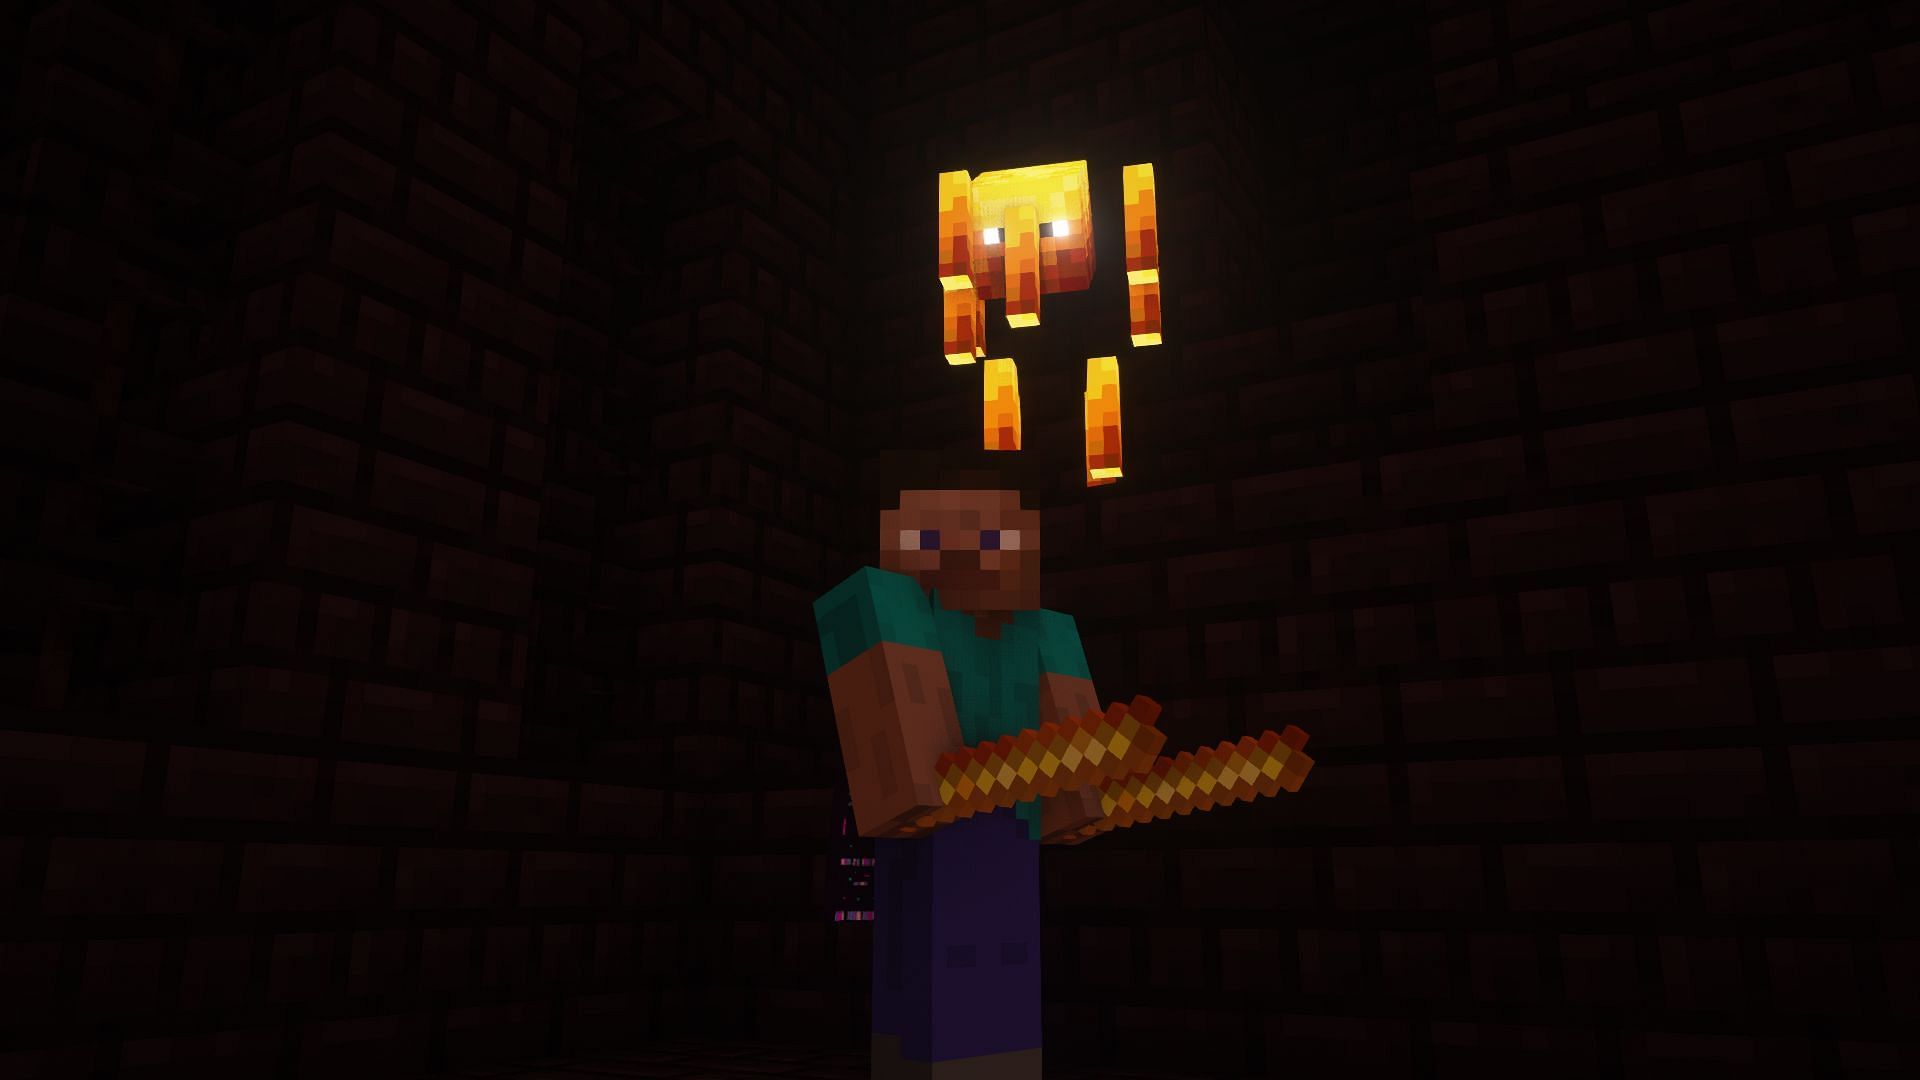 A Blaze in a nether fortress (Image via Mojang)